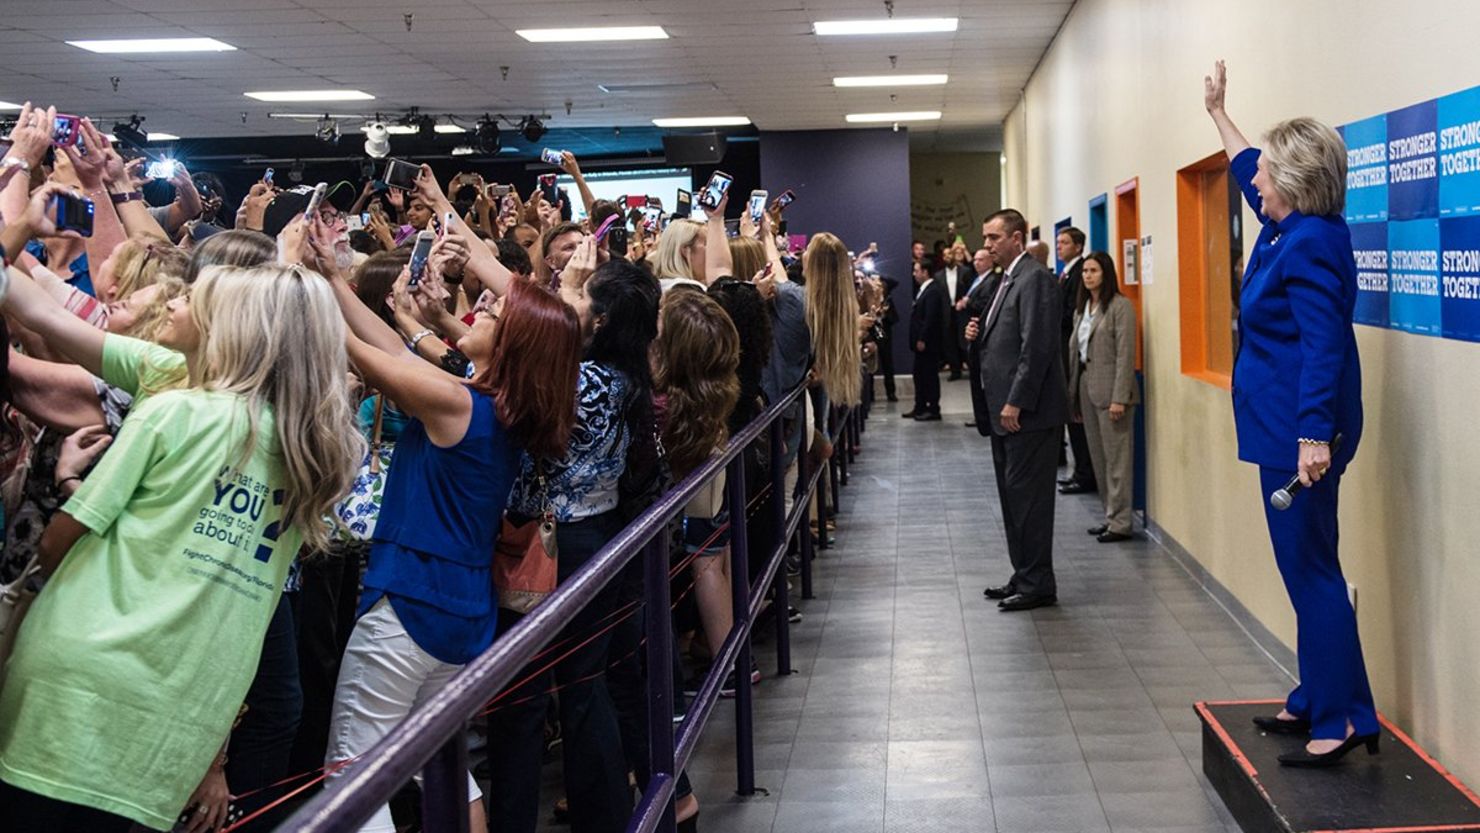 Hillary Clinton waves to a selfie-taking crowd at a recent campaign event in Orlando, Florida.